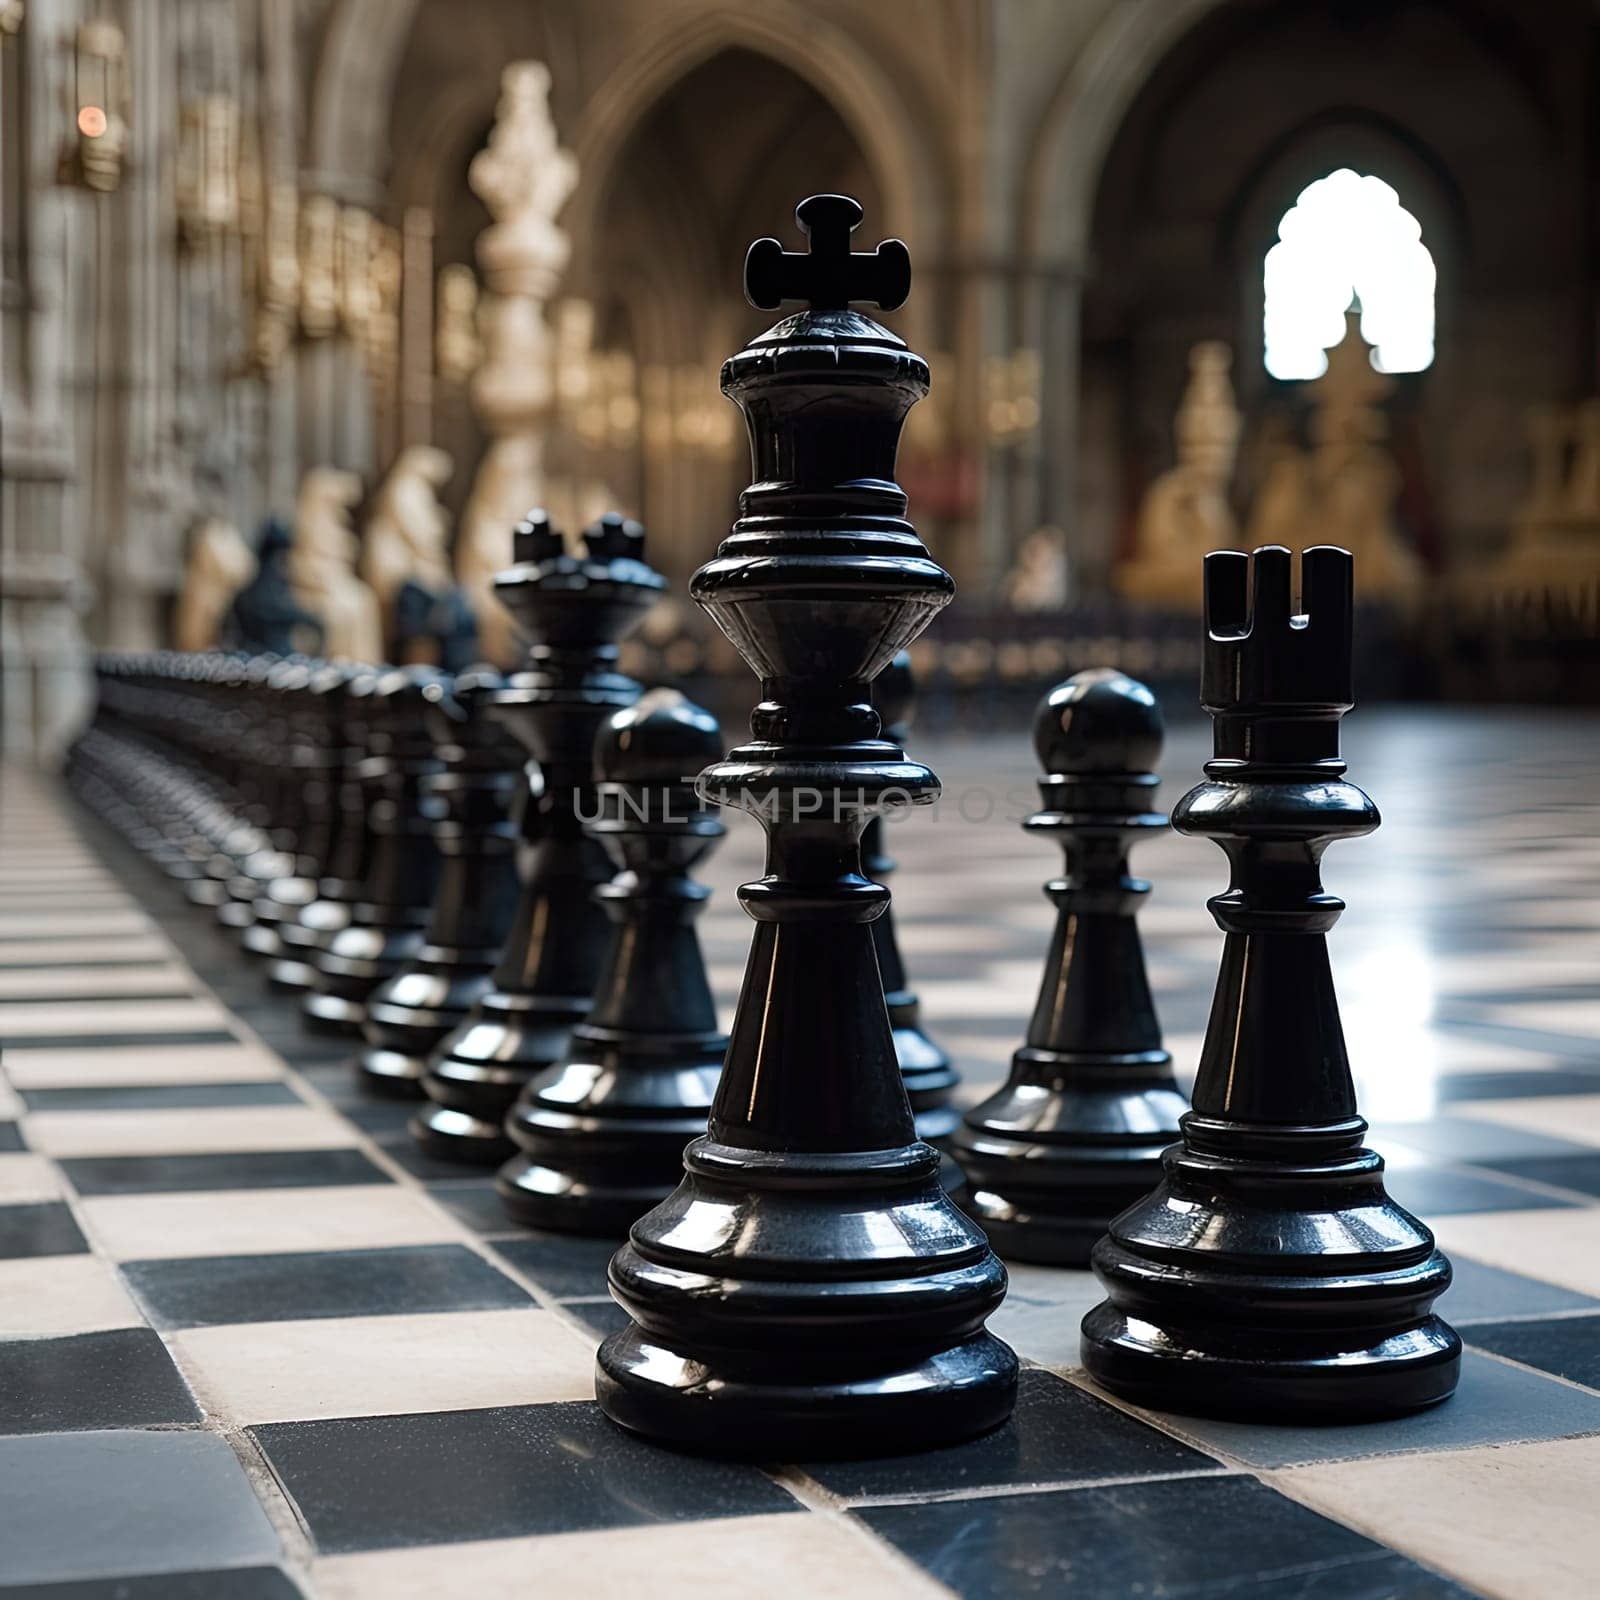 Chess pieces standing on a chessboard. Strategy of playing and winning, abstract by AnatoliiFoto